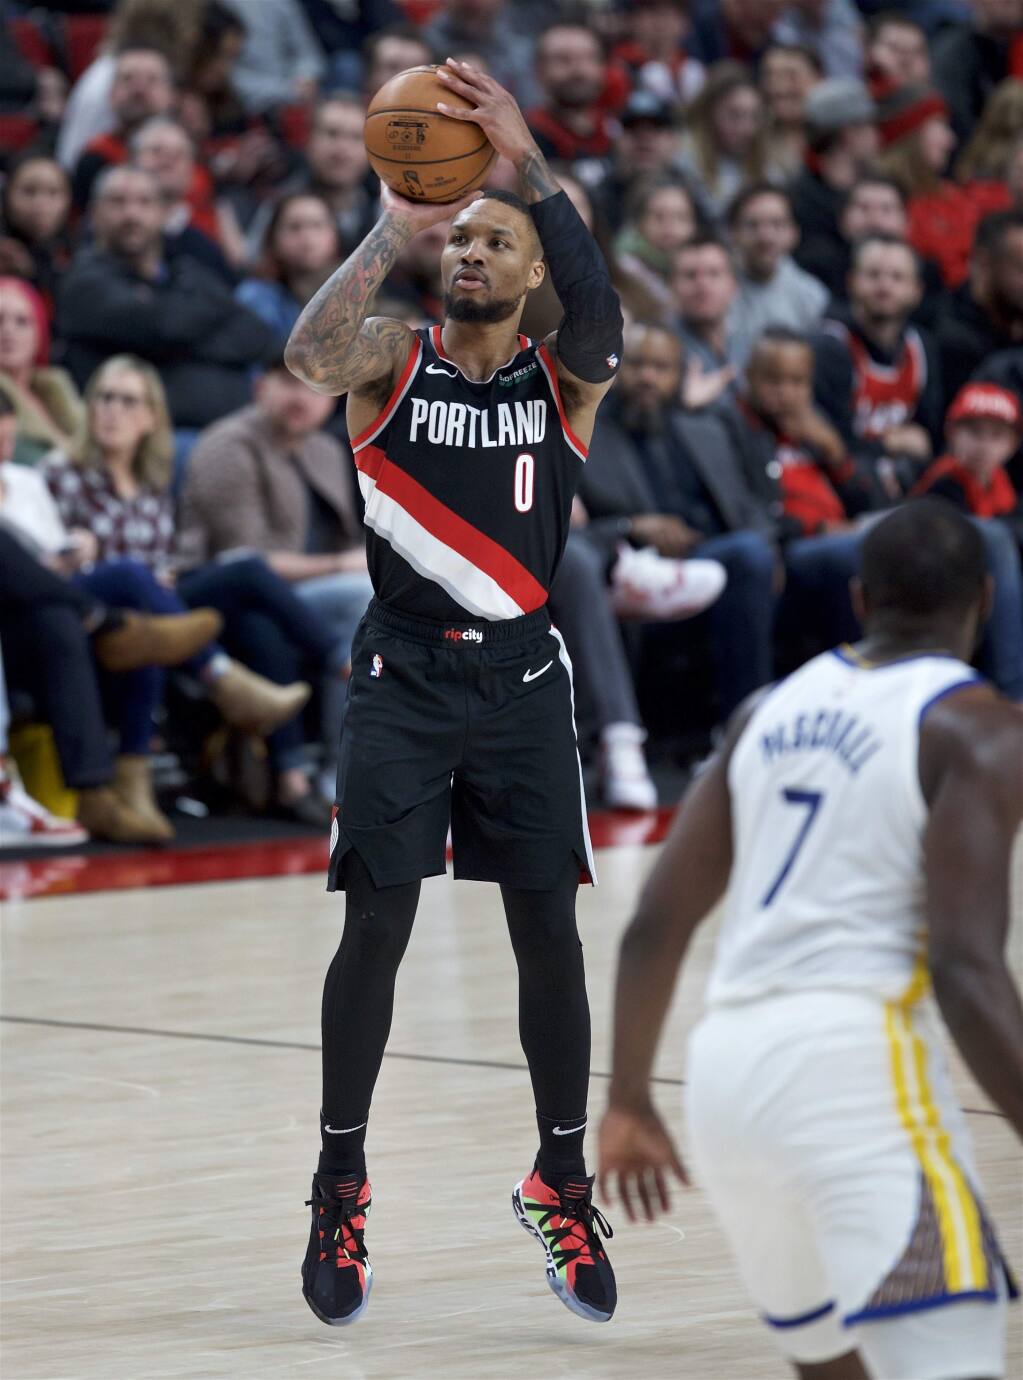 Gary Trent Jr. Has Been Lighting It Up From 3PT For The Blazers